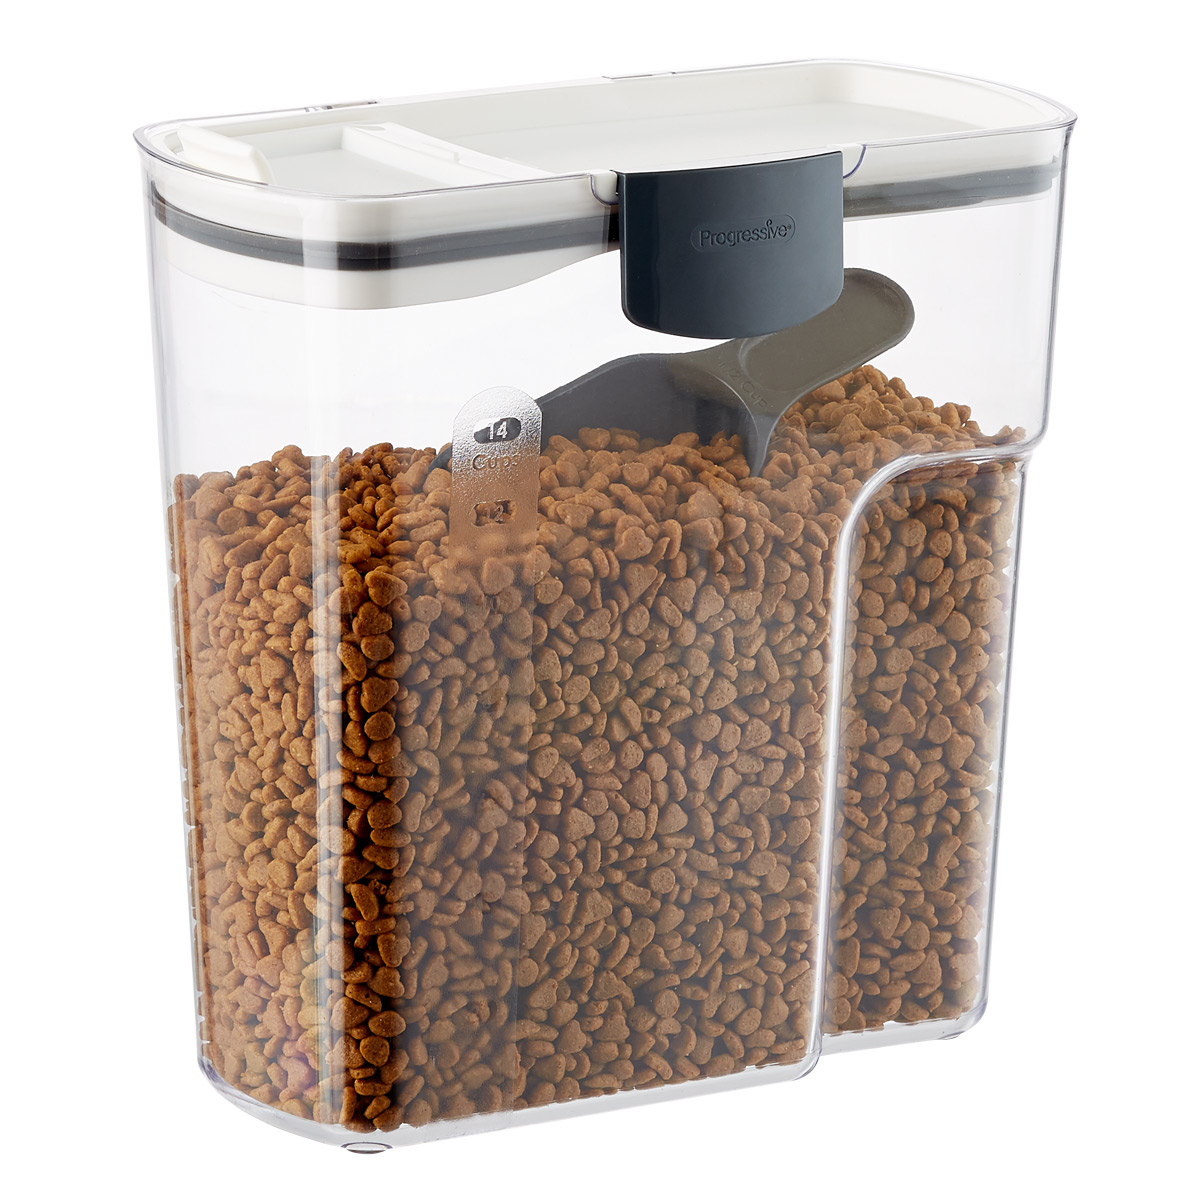 ProKeeper Pet Food Container | The 